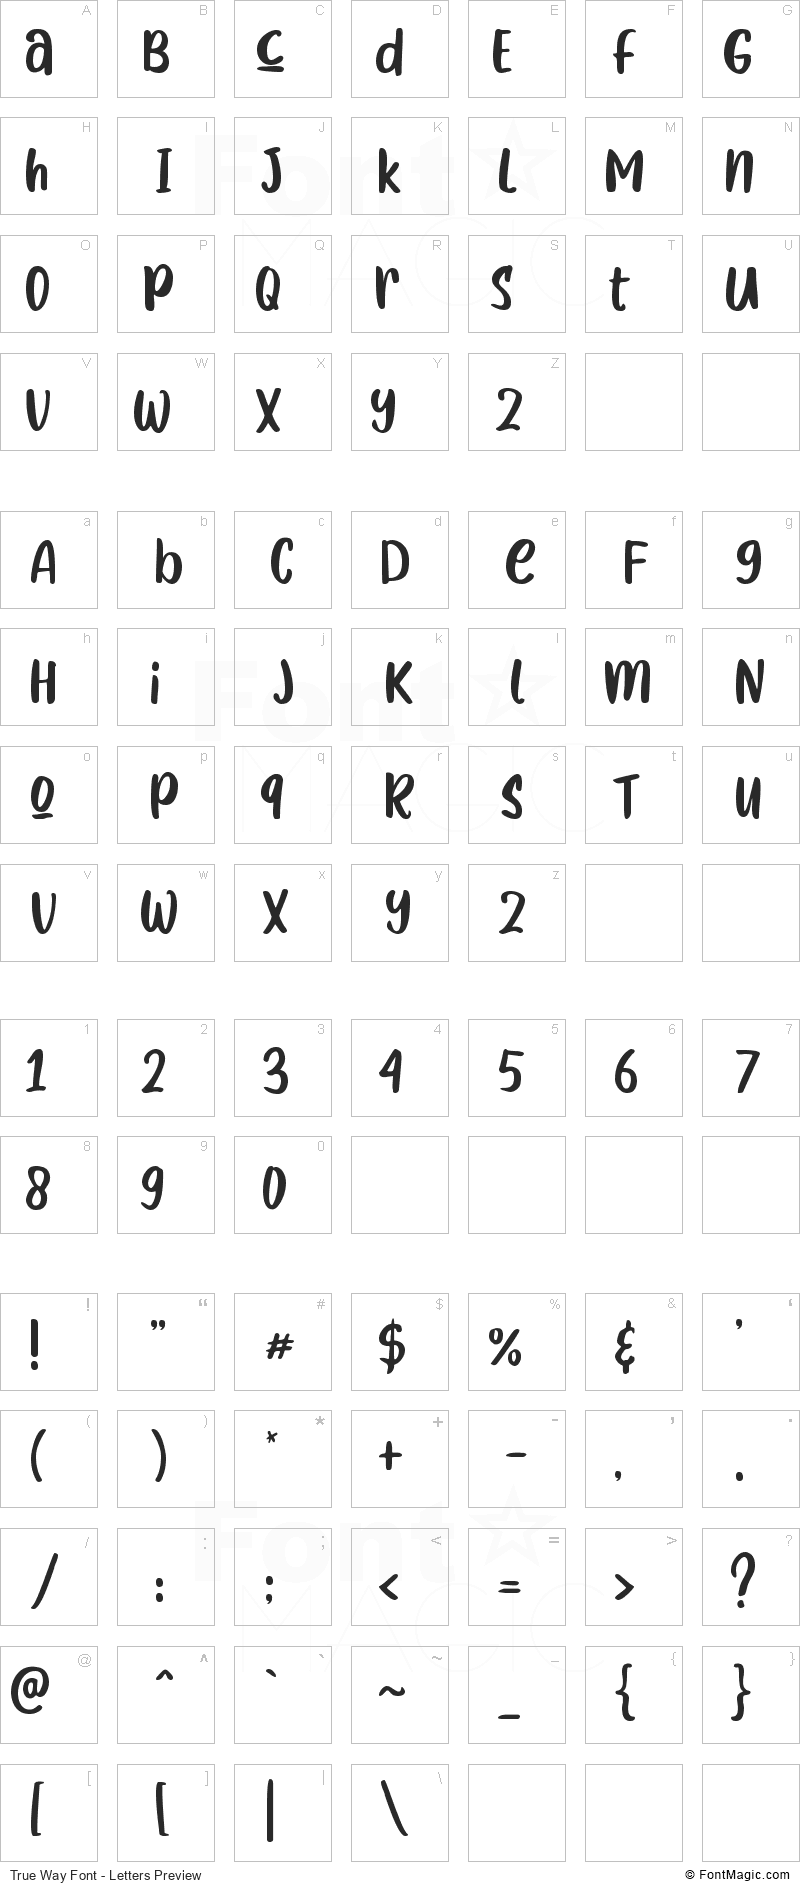 True Way Font - All Latters Preview Chart